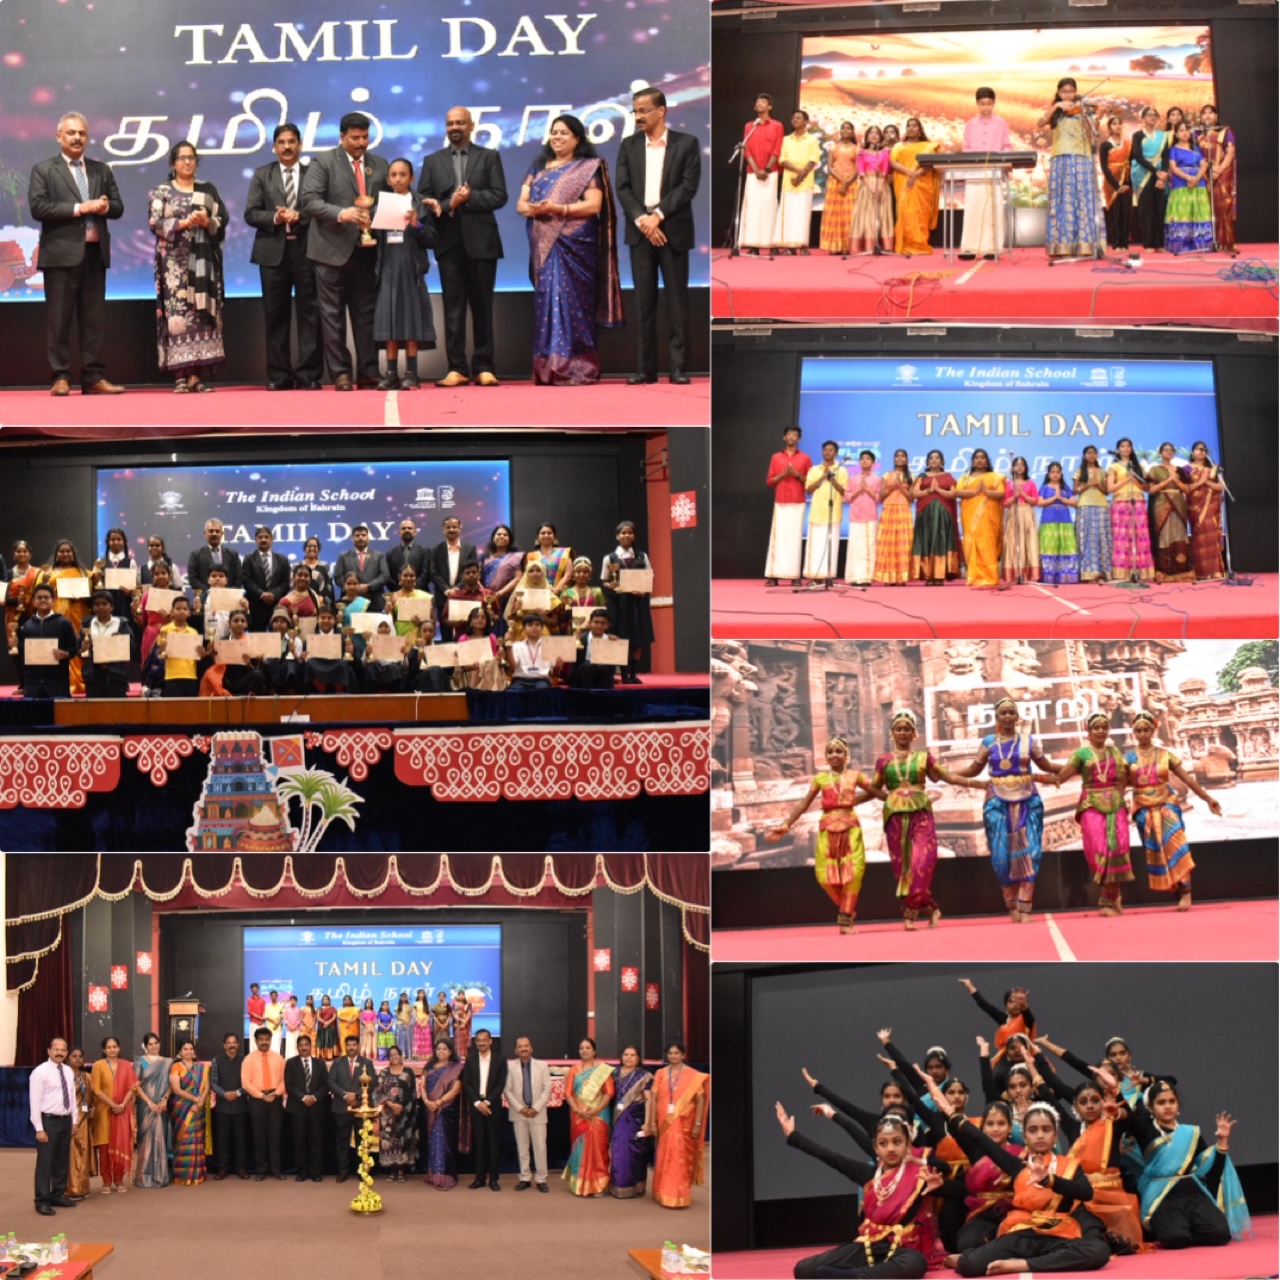 The Indian School Celebrates Tamil Day